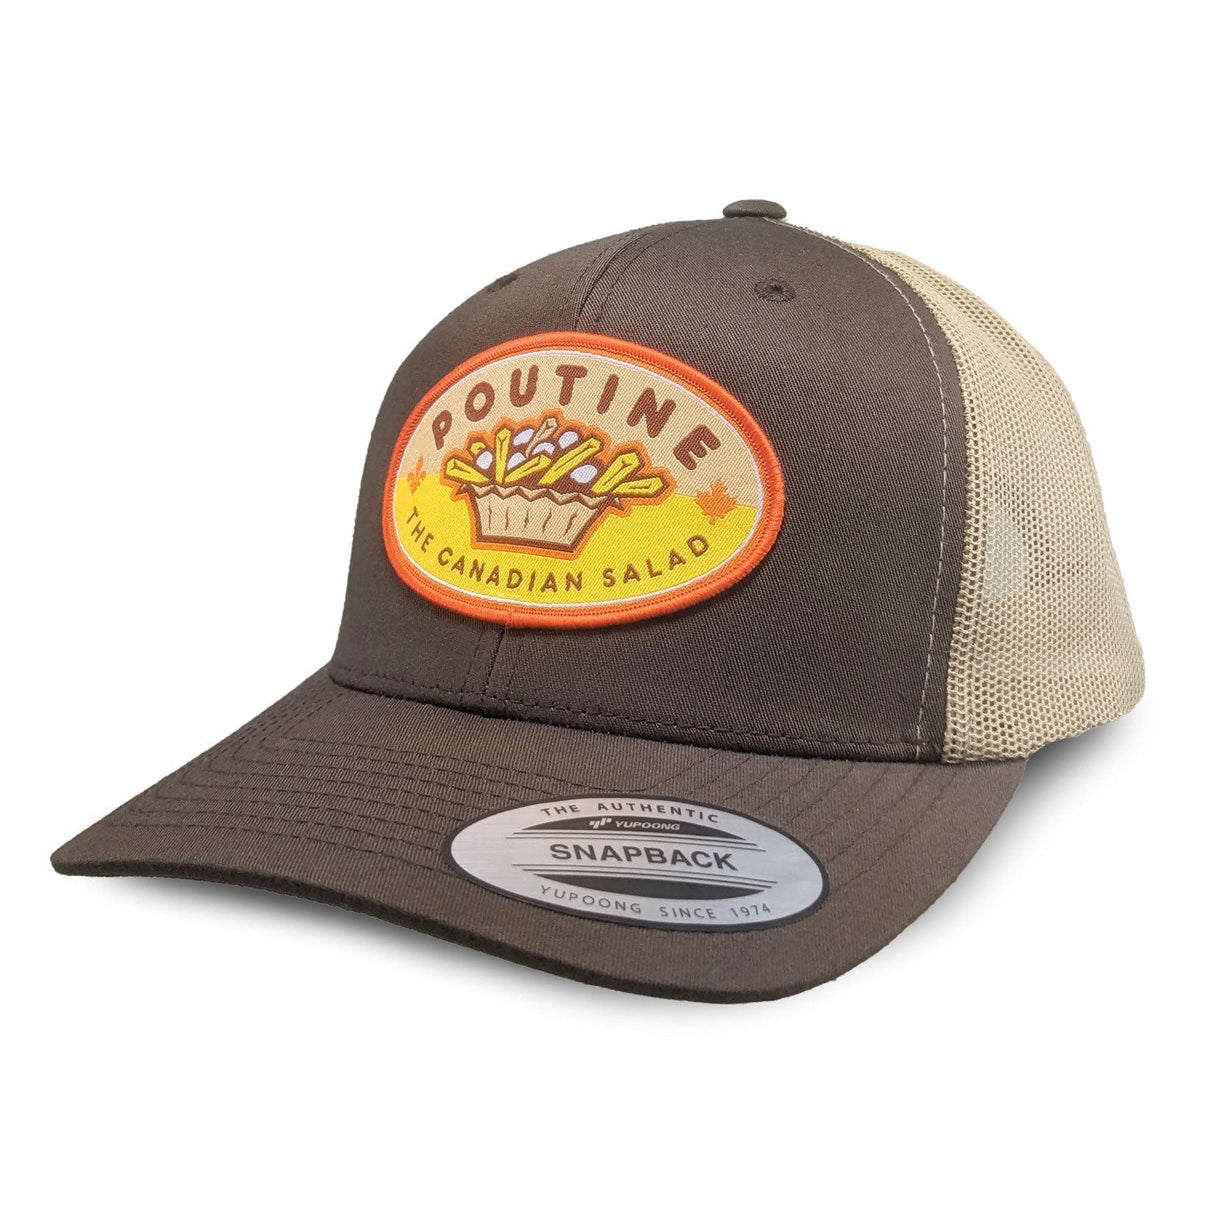 Poutine the Canadian Salad Curved Brim Trucker Cap